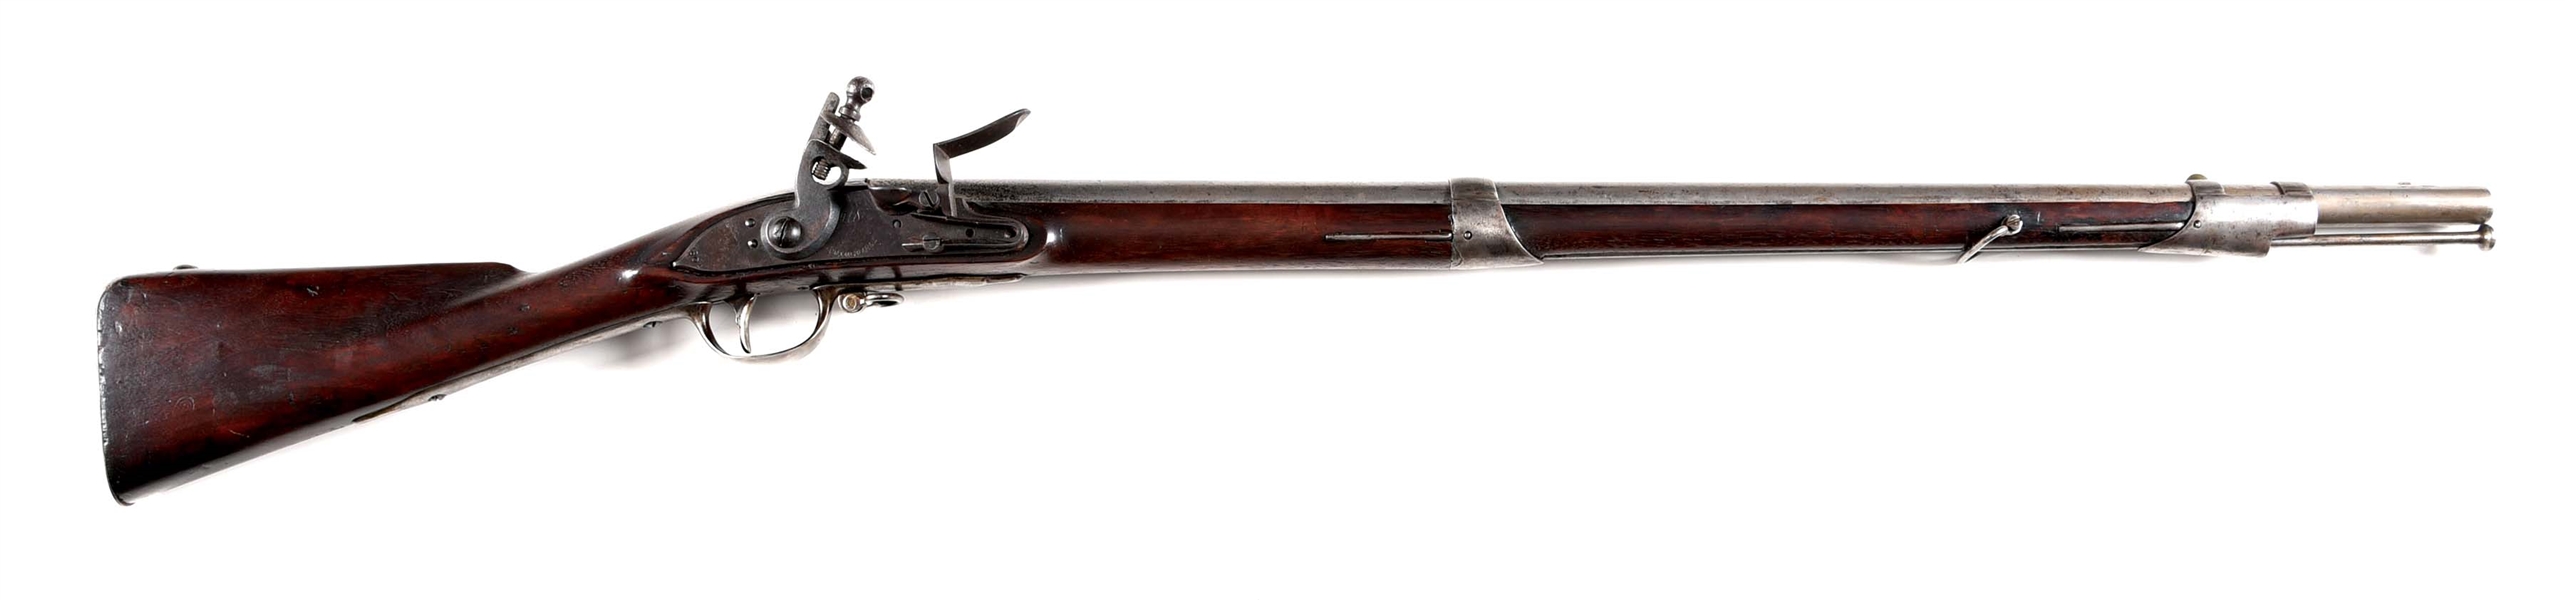 (A) US SPRINGFIELD MODEL 1795 FLINTLOCK MUSKET WITH 1813 ALTERATIONS DATED 1804.